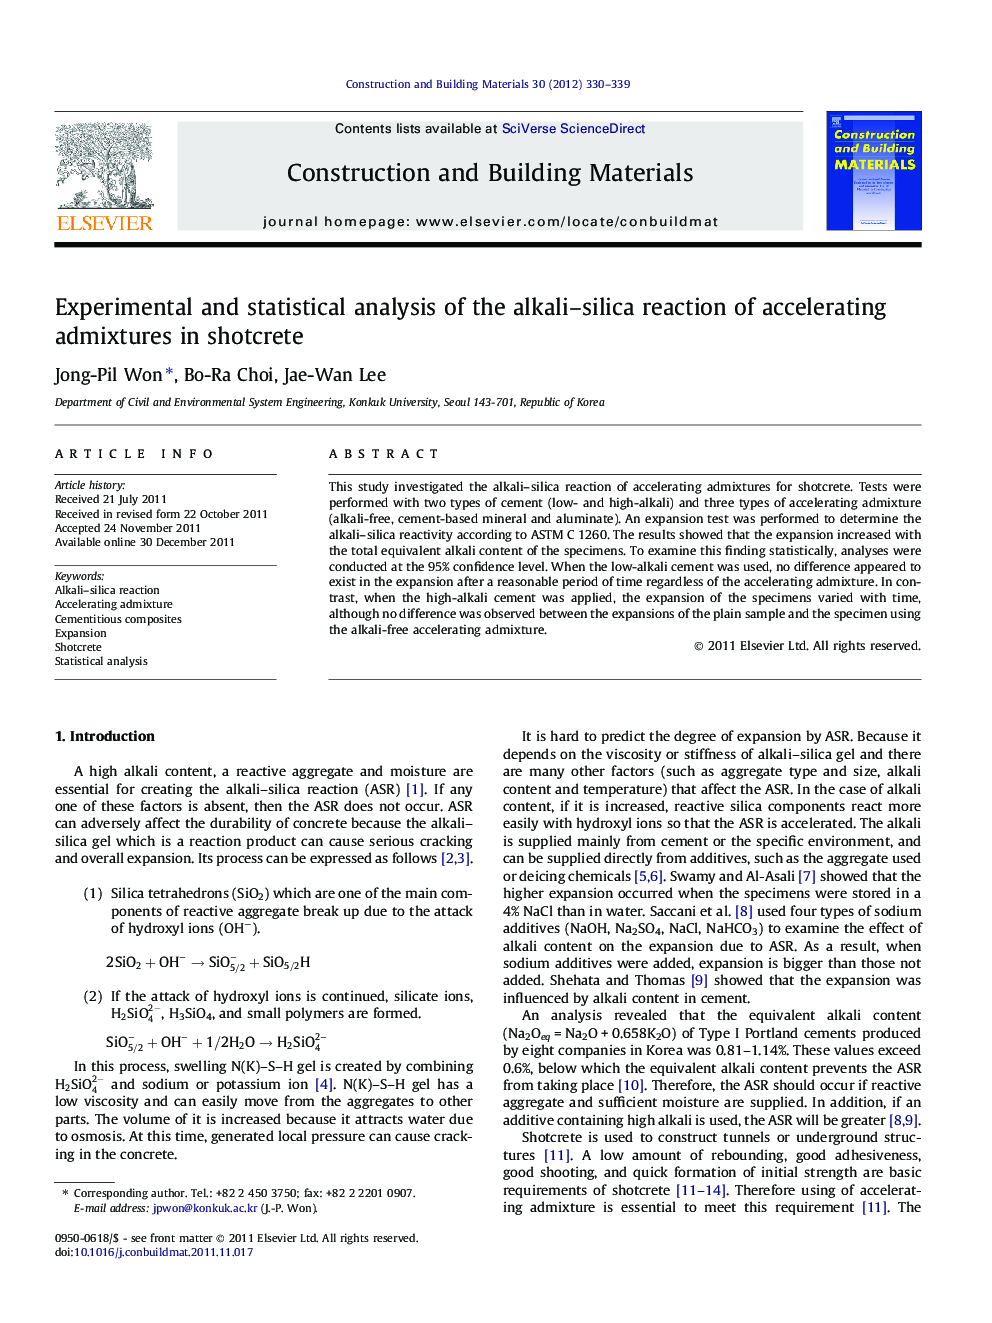 Experimental and statistical analysis of the alkali–silica reaction of accelerating admixtures in shotcrete